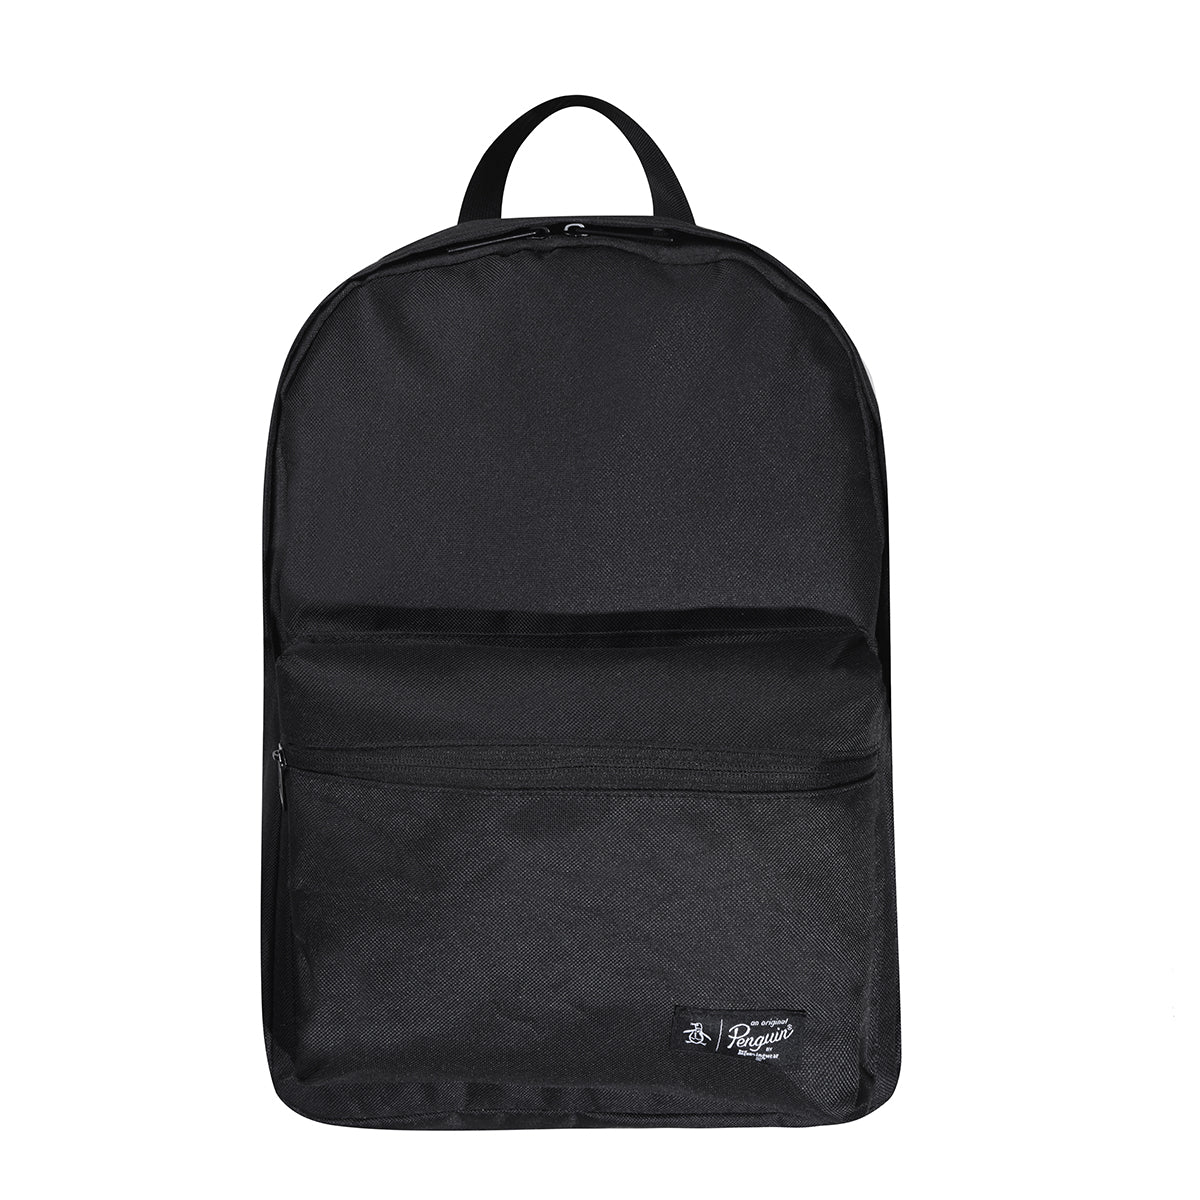 View Jacob Classic Colourblock Backpack In Black information